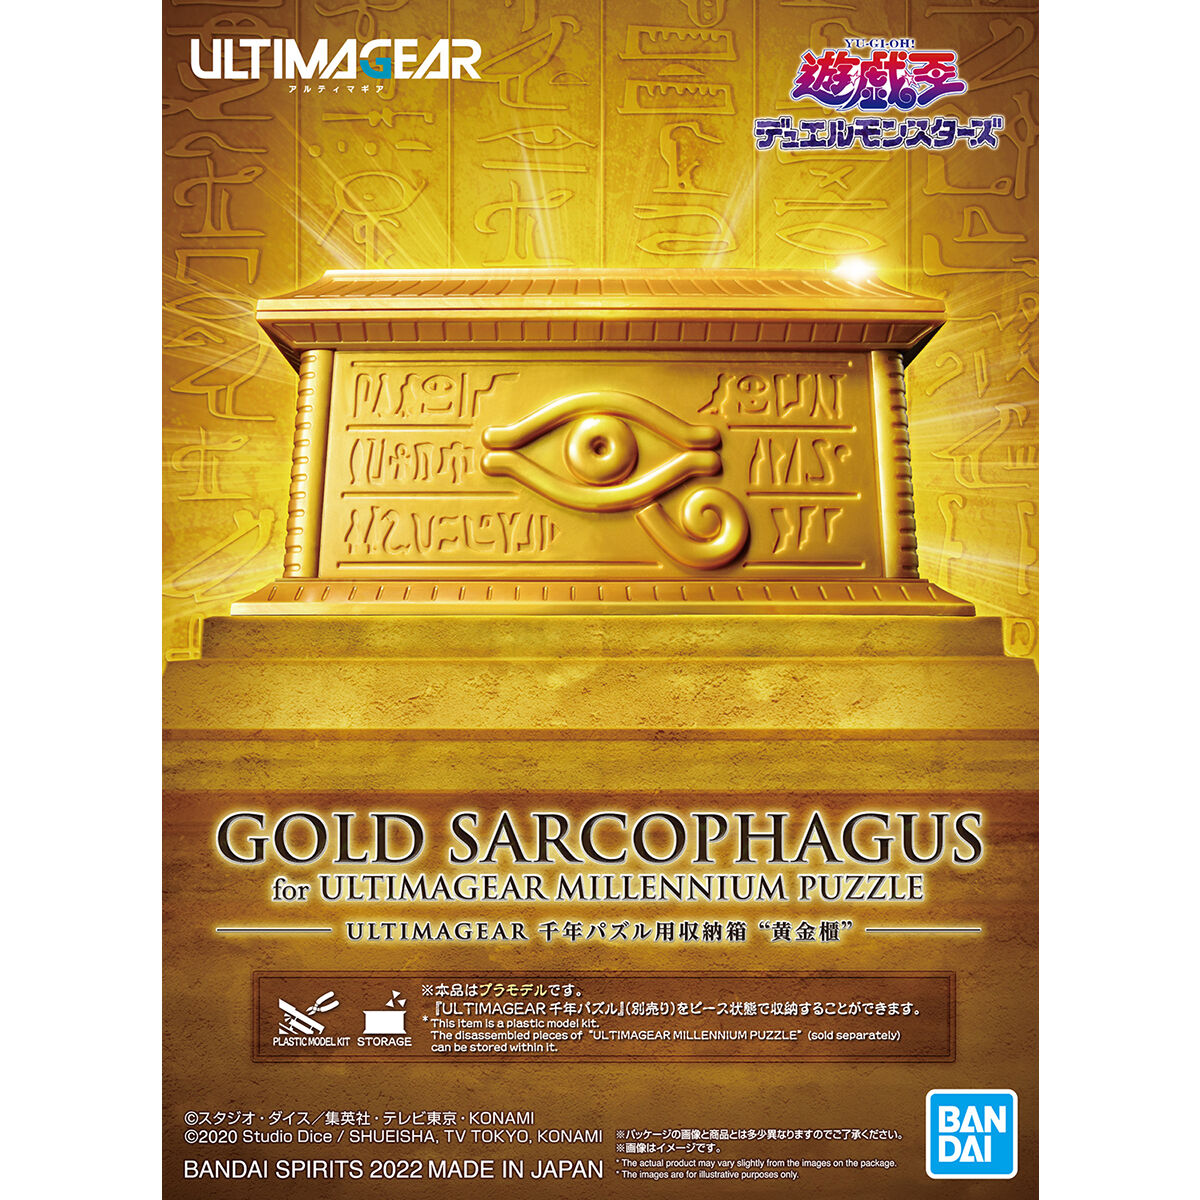 Yu-Gi-Oh! Duel Monsters UltimaGear Millennium Puzzle Model Kit